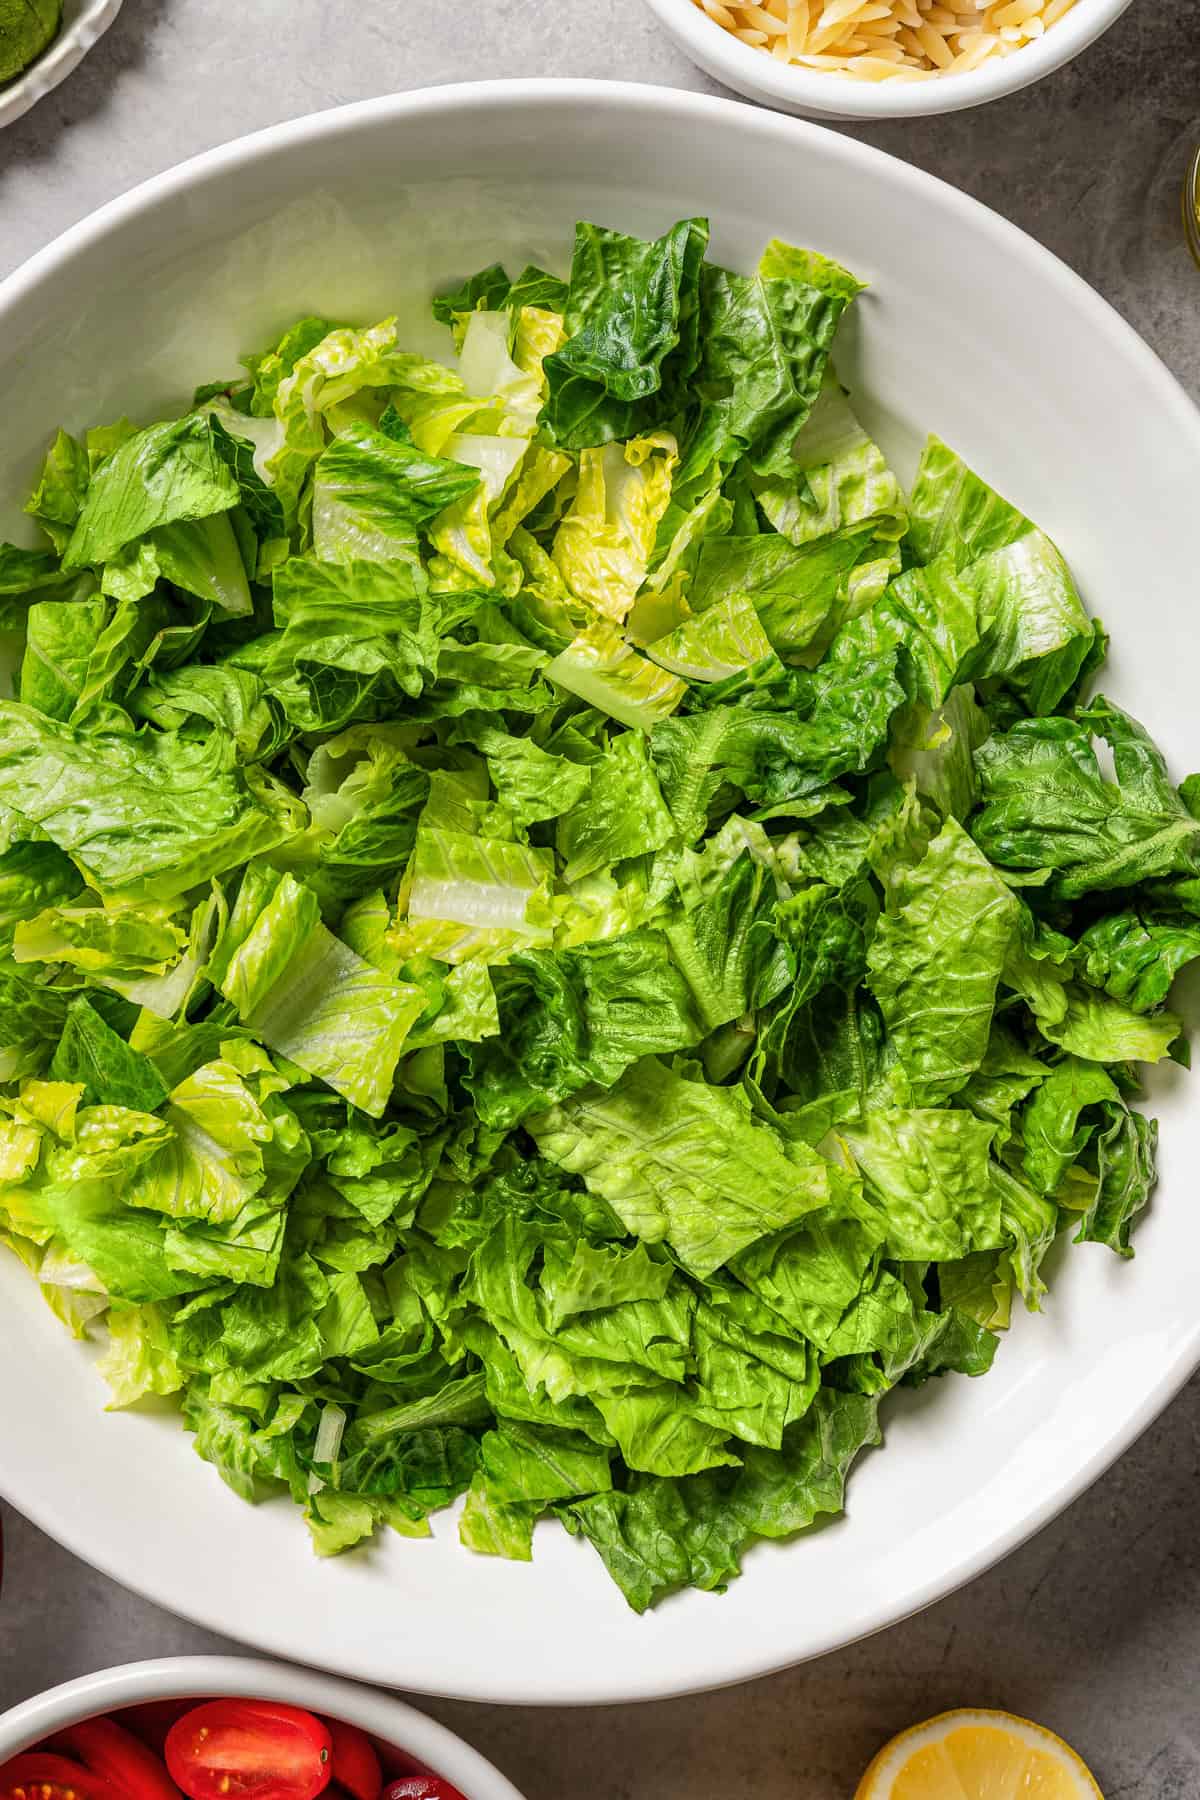 Chopped romaine lettuce greens in a large white bowl.